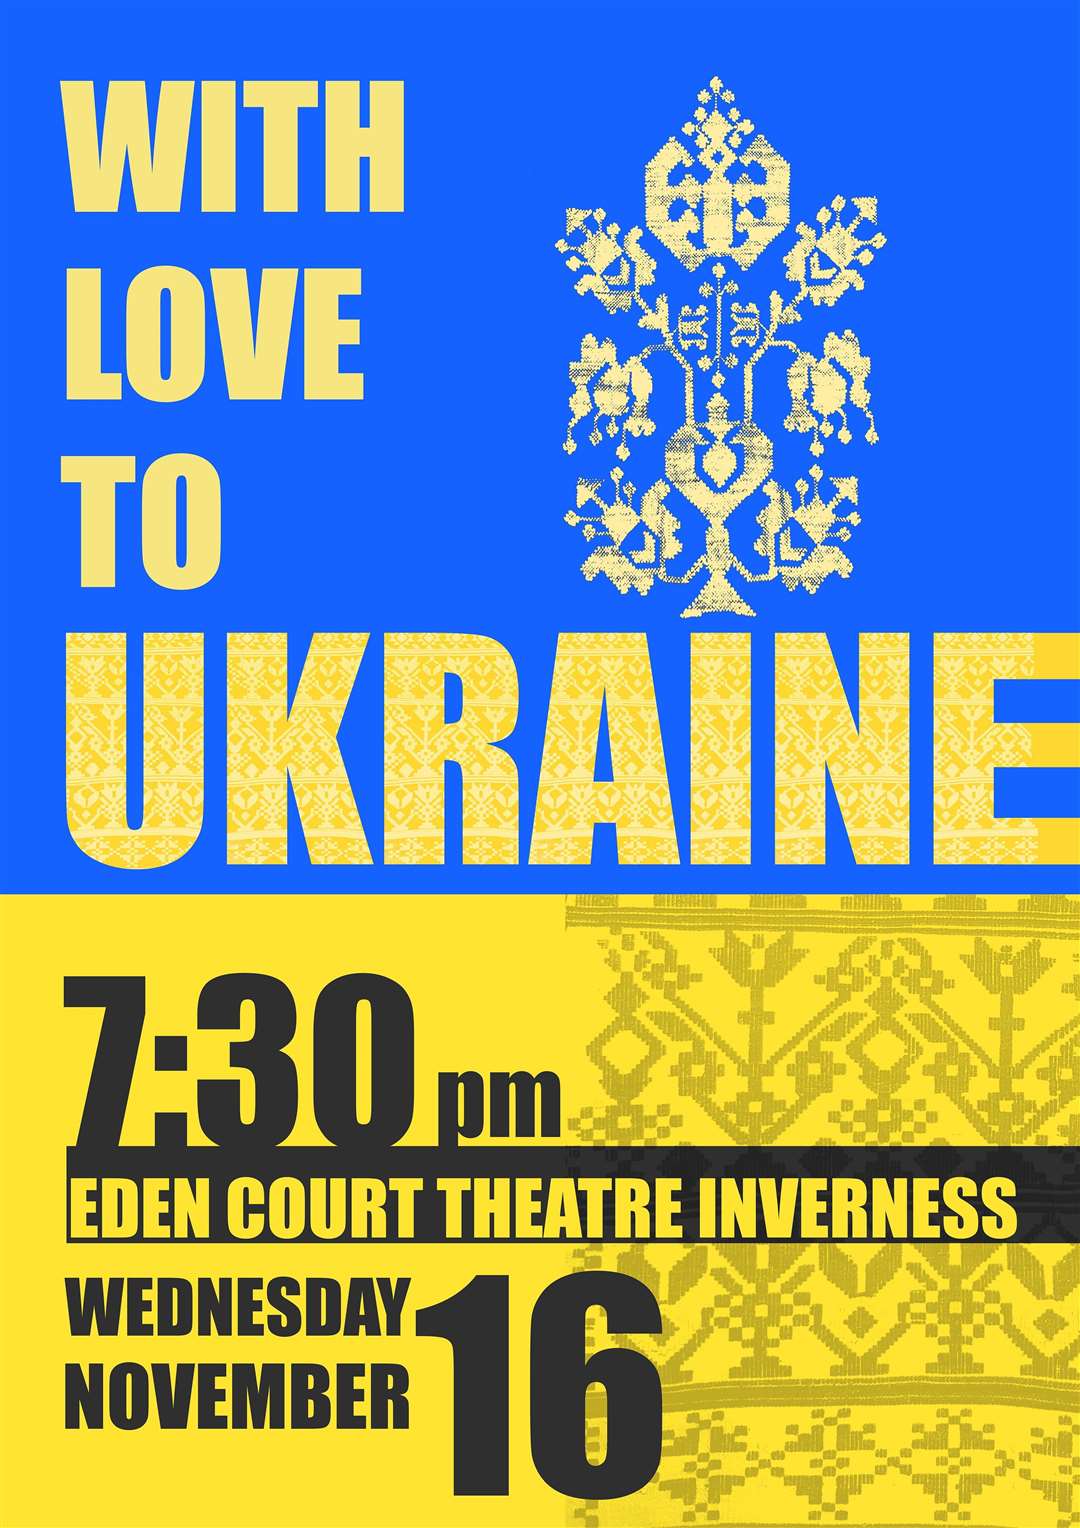 With Love To Ukraine - tickets are now on sale for the event.